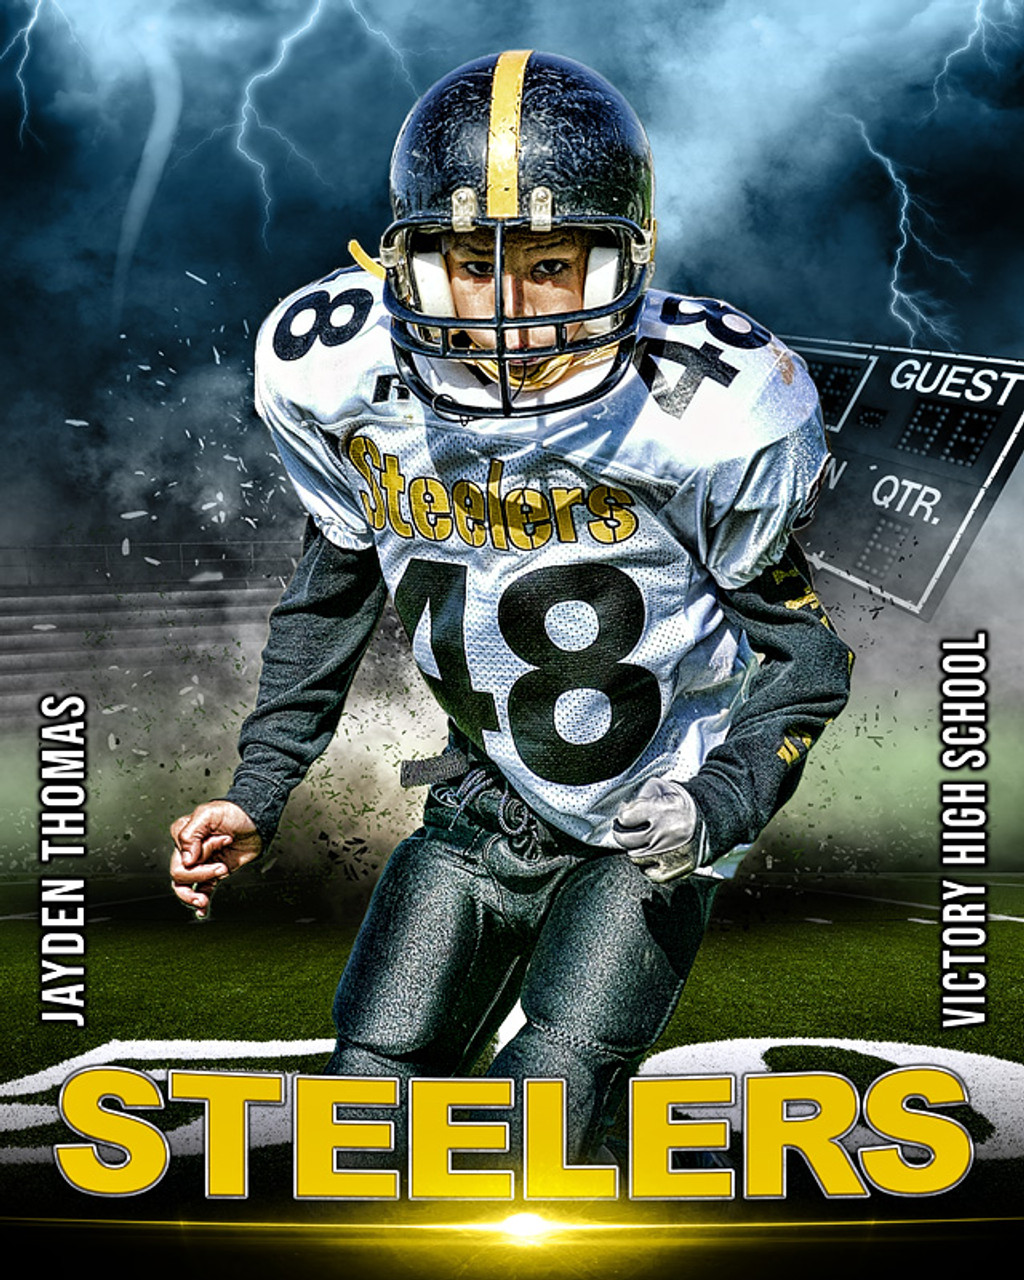 SPORTS POSTER TEMPLATE - FOOTBALL DESTRUCTION - PHOTOSHOP LAYERED SPORTS TEMPLATE